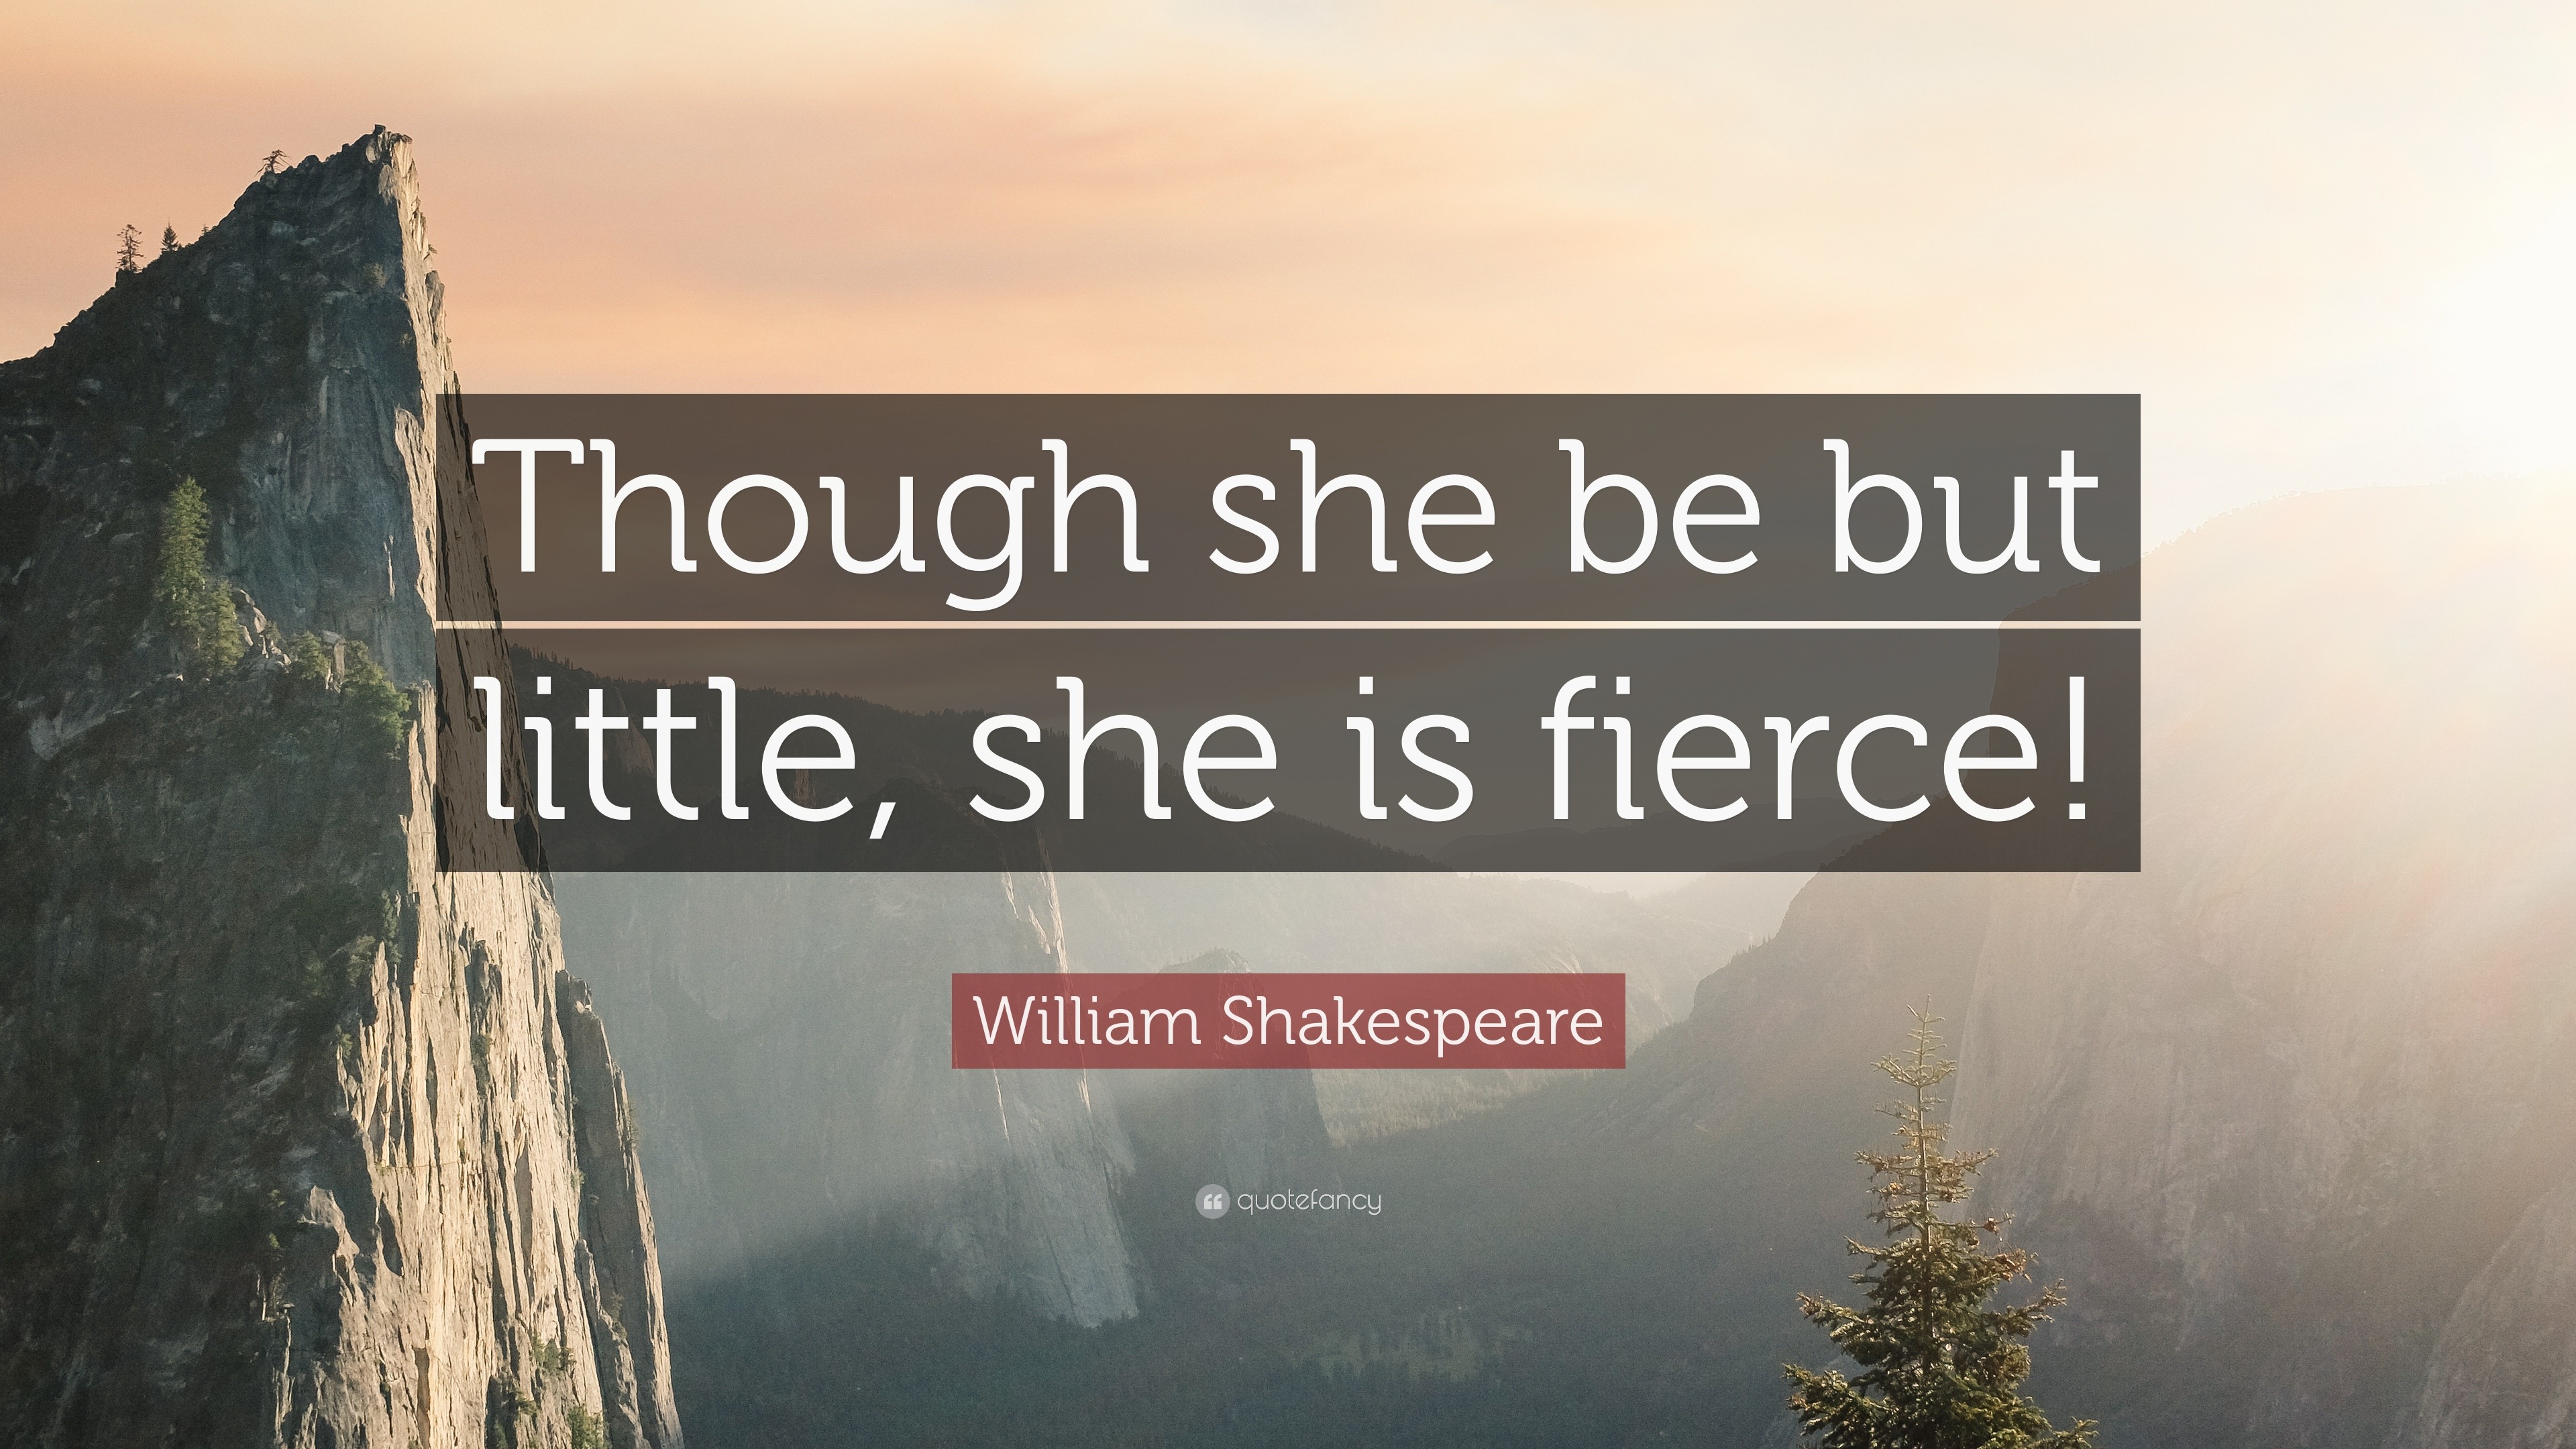 william-shakespeare-quote-though-she-be-but-little-she-is-fierce